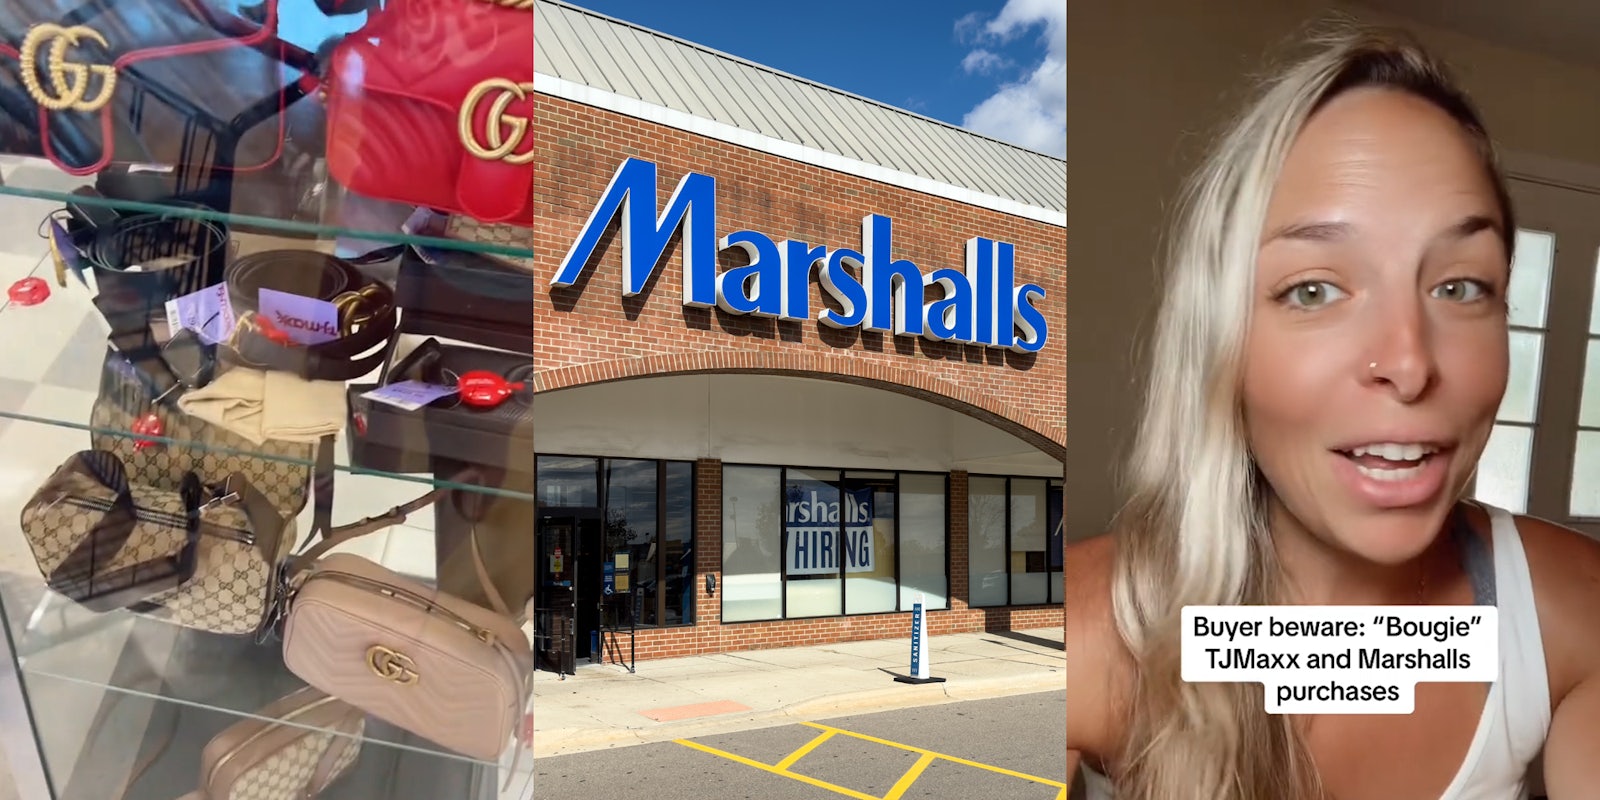 designer goods on display at Marshalls/TJ Maxx (l) Marshalls building with sign (c) woman speaking with caption 'Buyer beware: 'Boujie' TJMAXX and Marshalls purchases' (r)